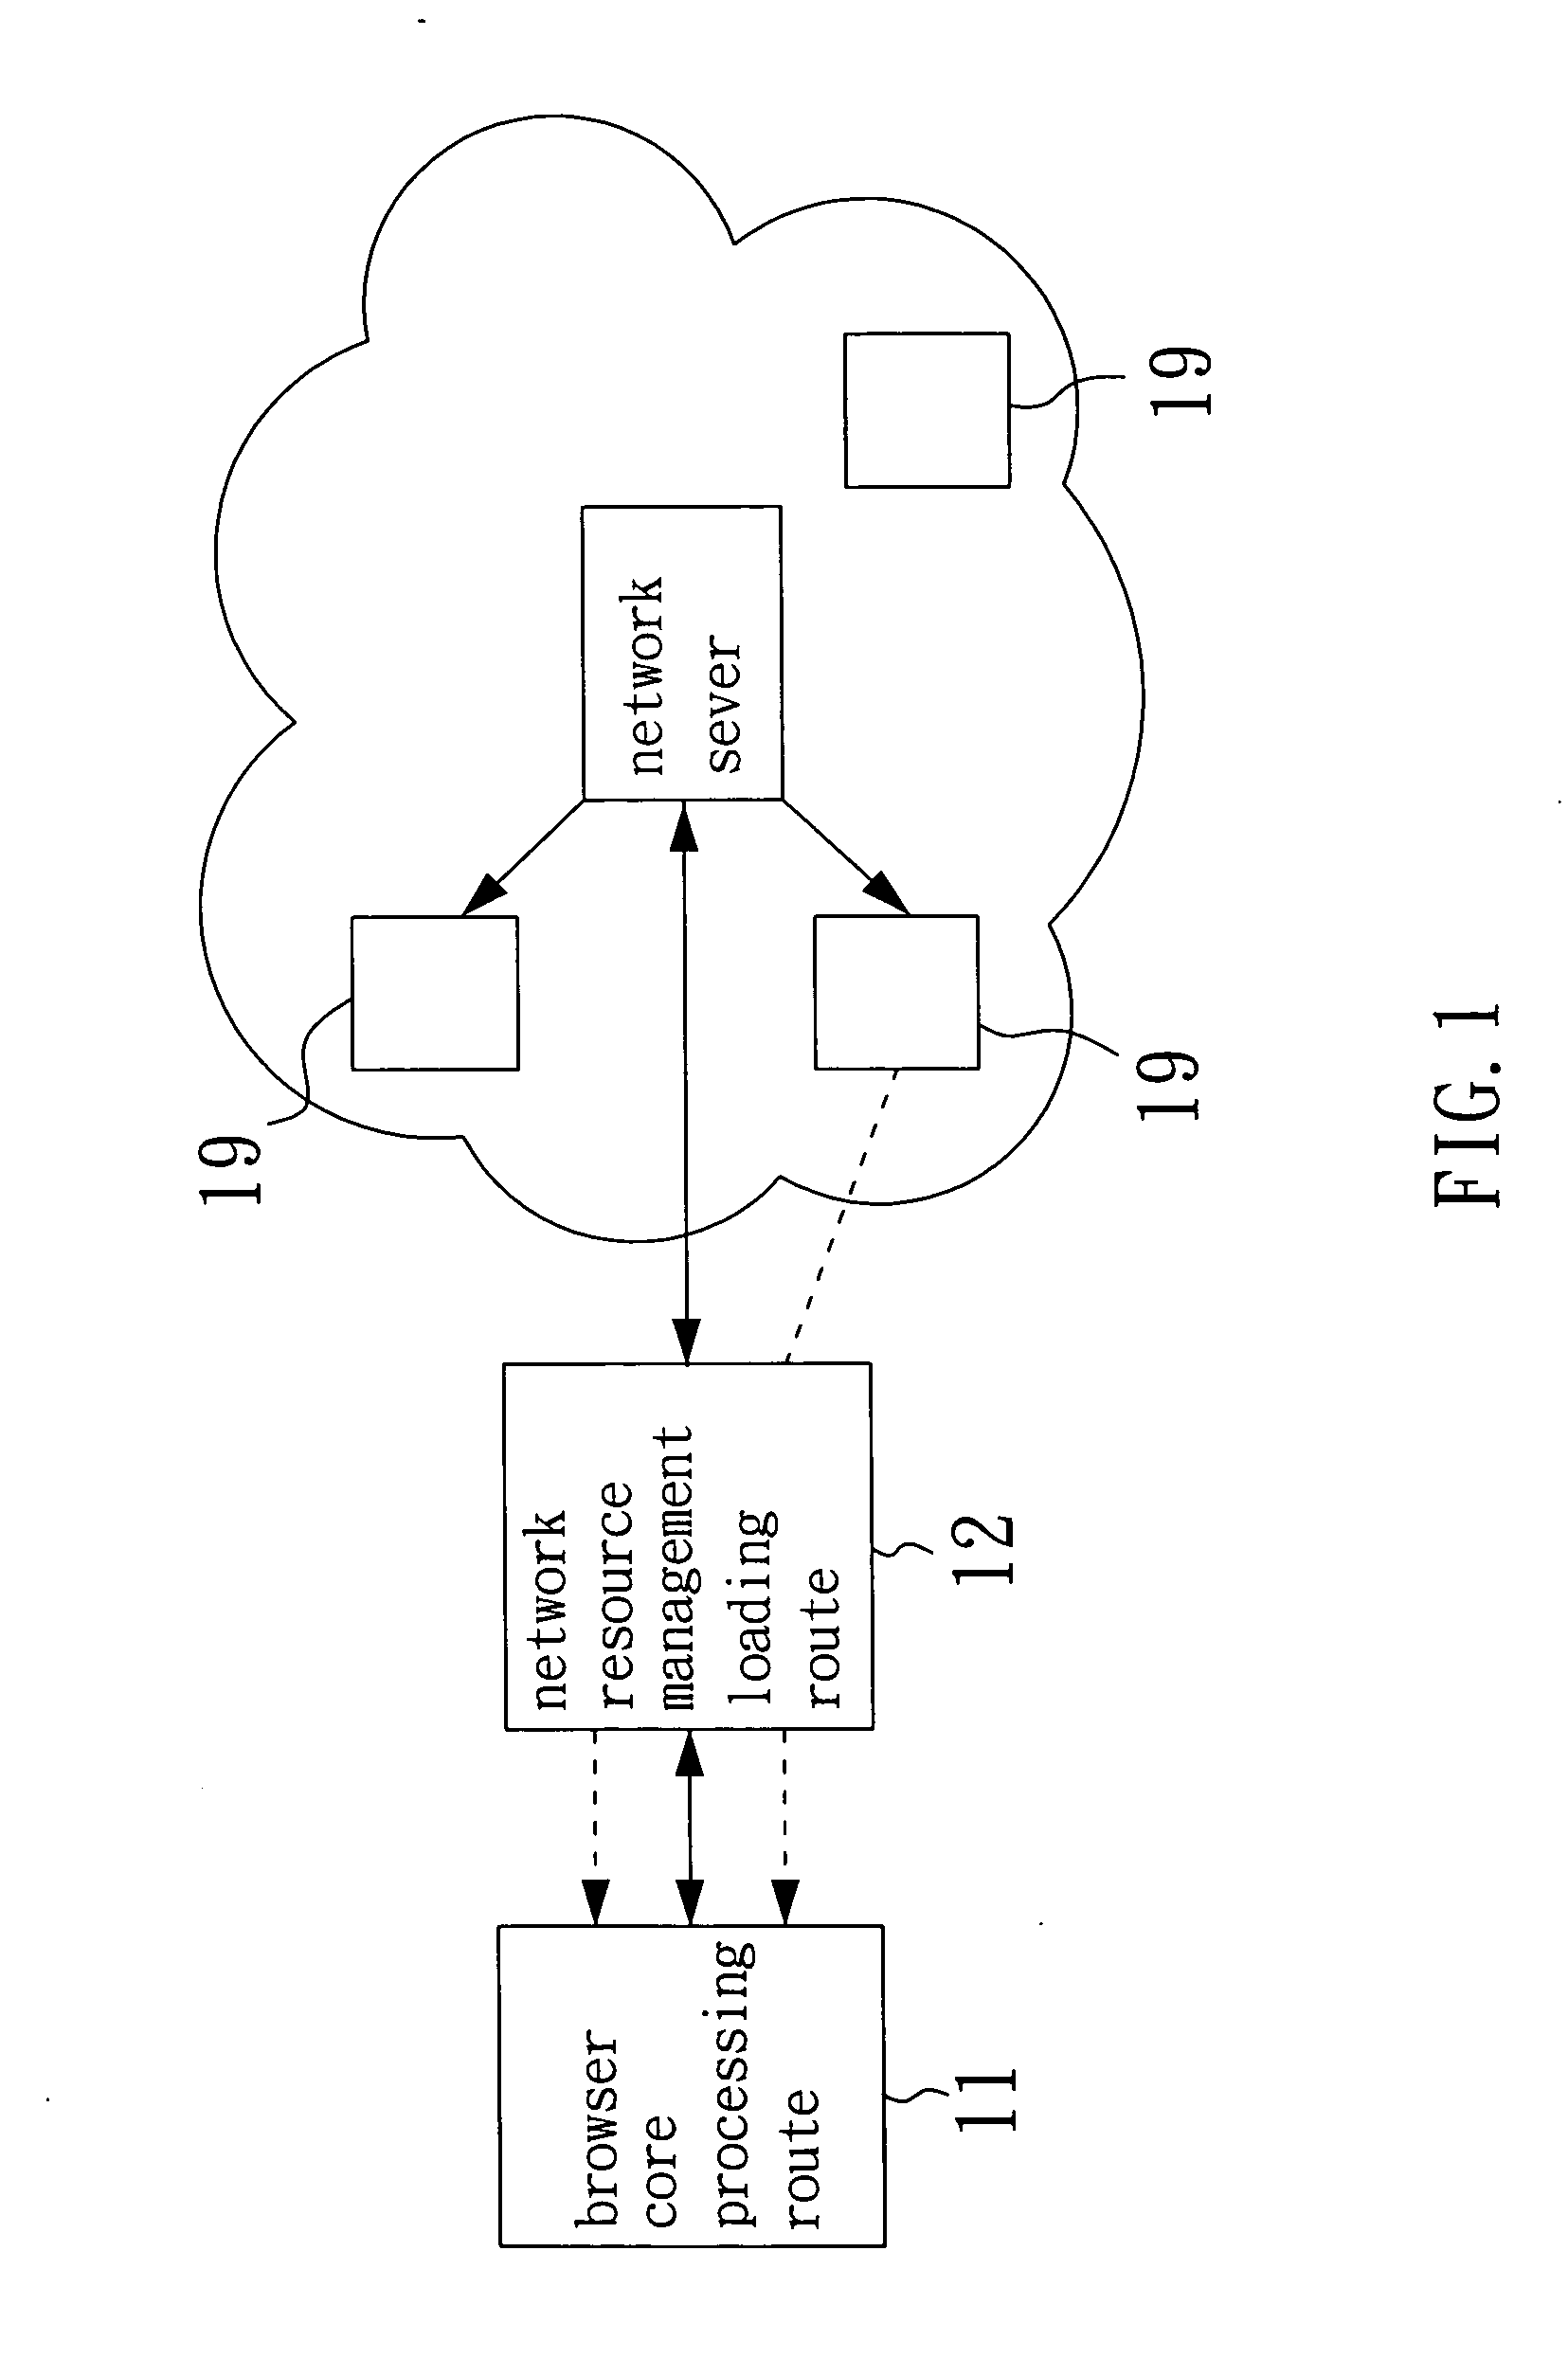 Method and system for dynamically determining web resource to be loaded and saving space